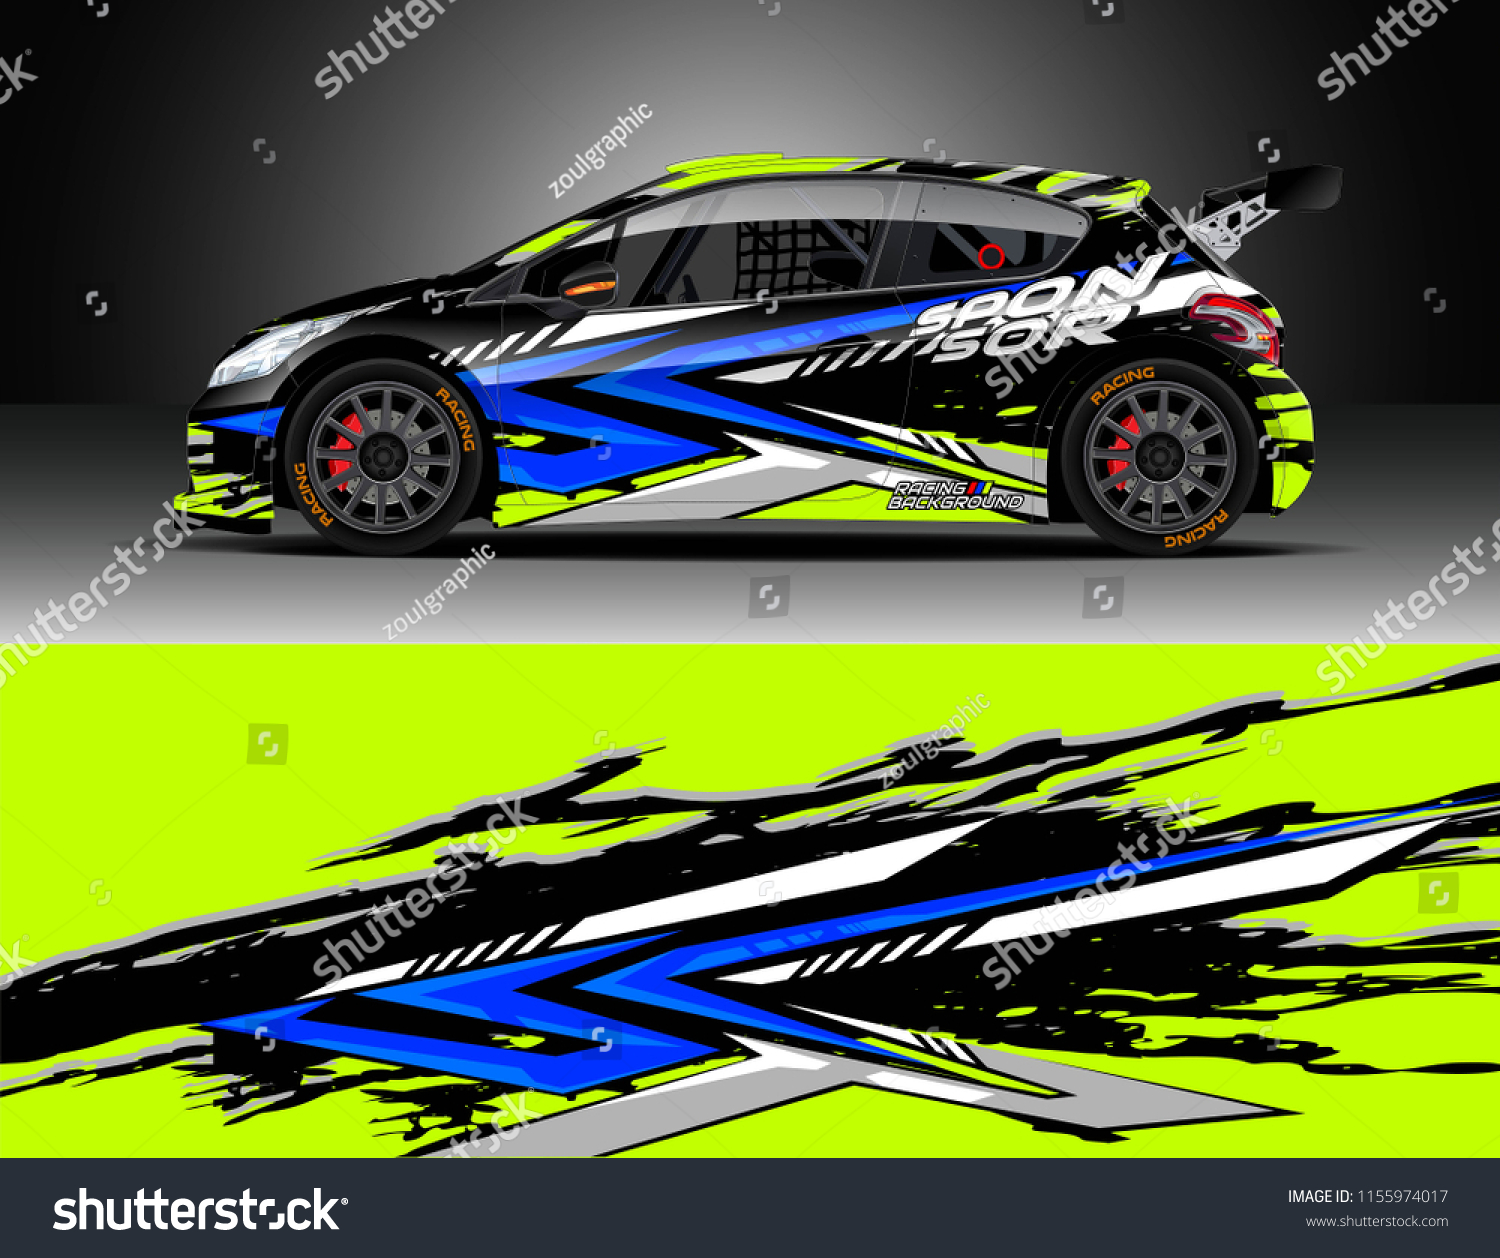 Car Decal Design Vector Graphic Abstract Stock Vector (Royalty Free ...